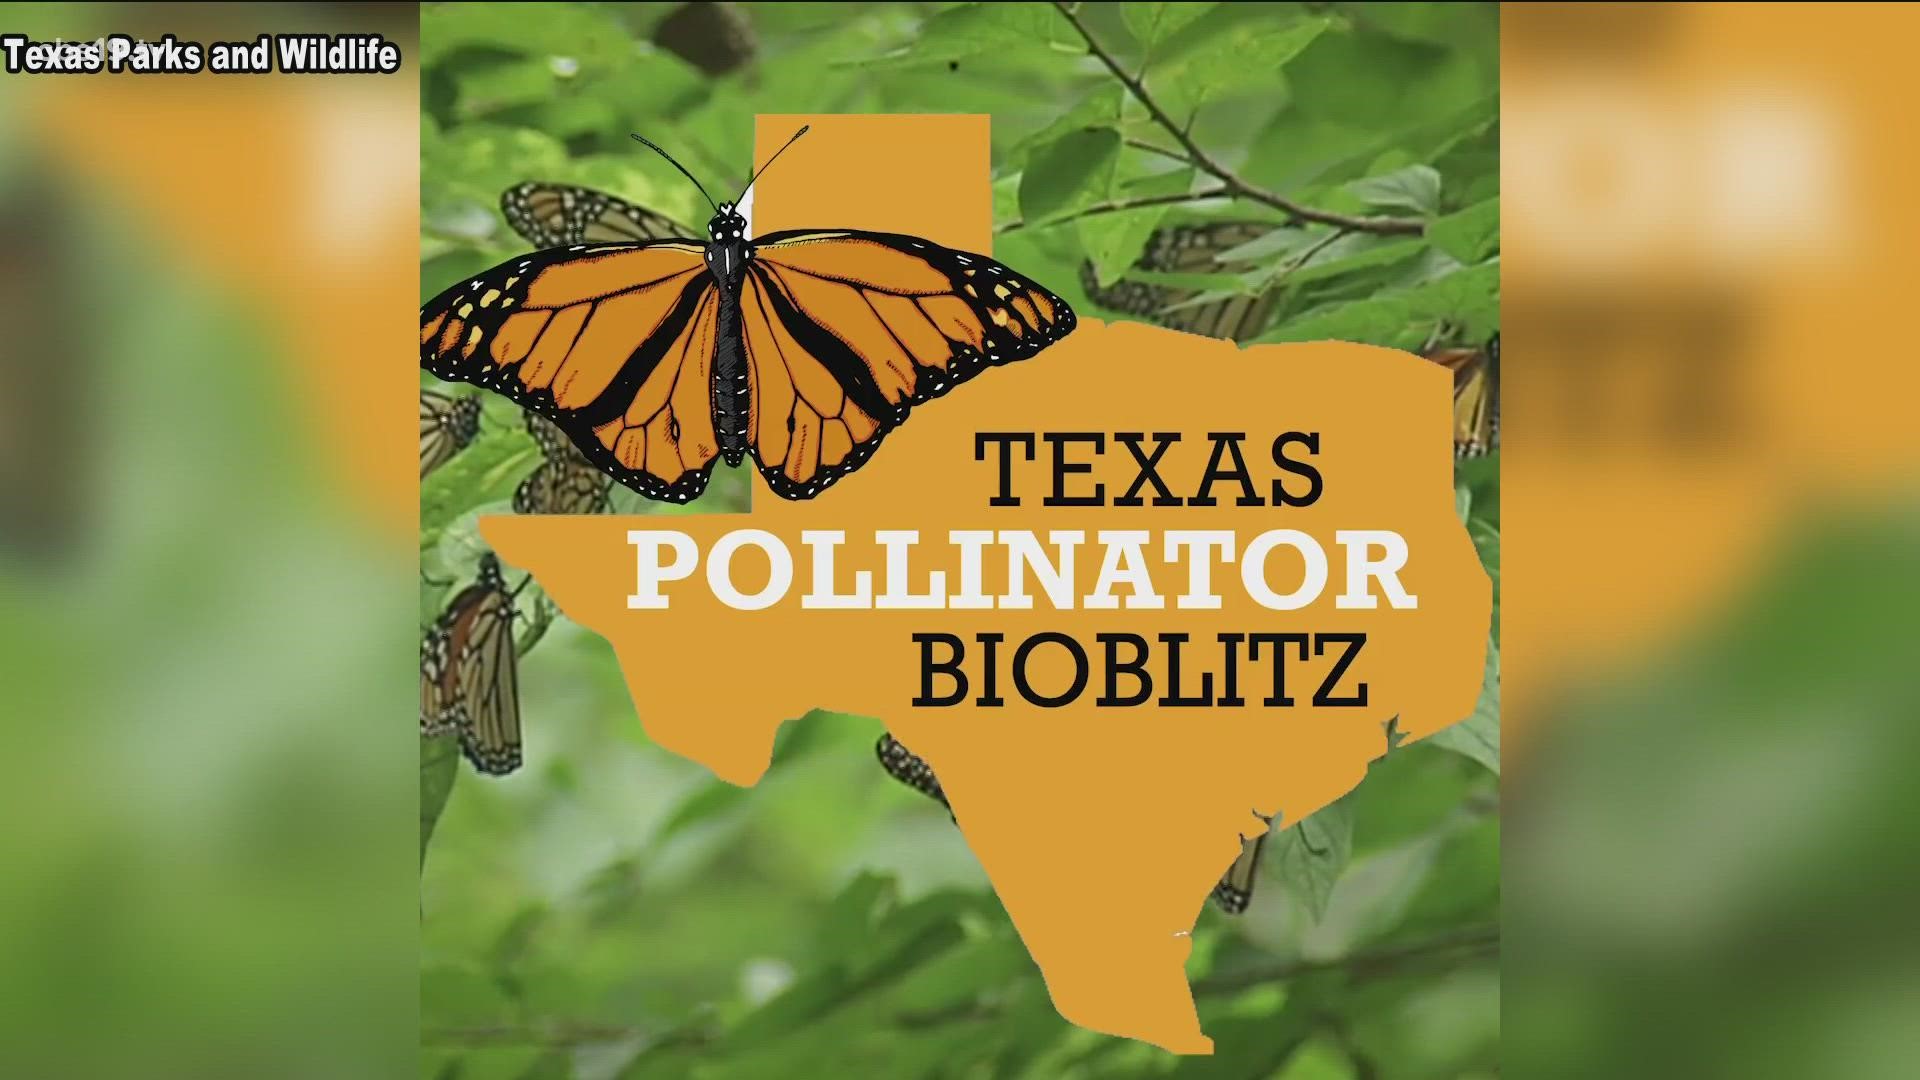 The event runs until October 17th and encourages Texans to look out for our helpful pollinators